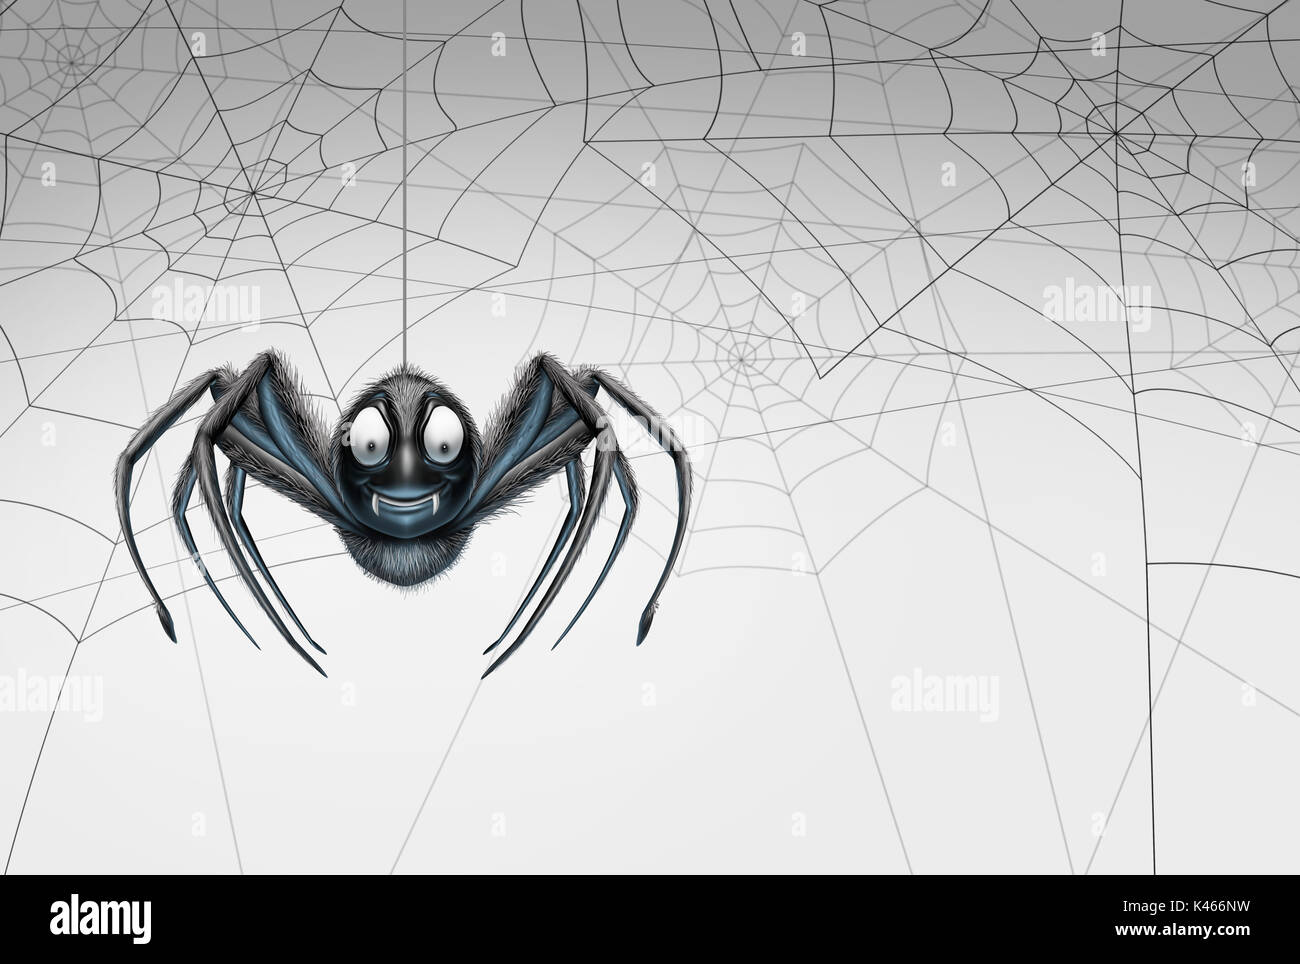 Halloween spider design element background as a creepy crawler arachnid insect hanging from a thread with spiderwebs on white. Stock Photo